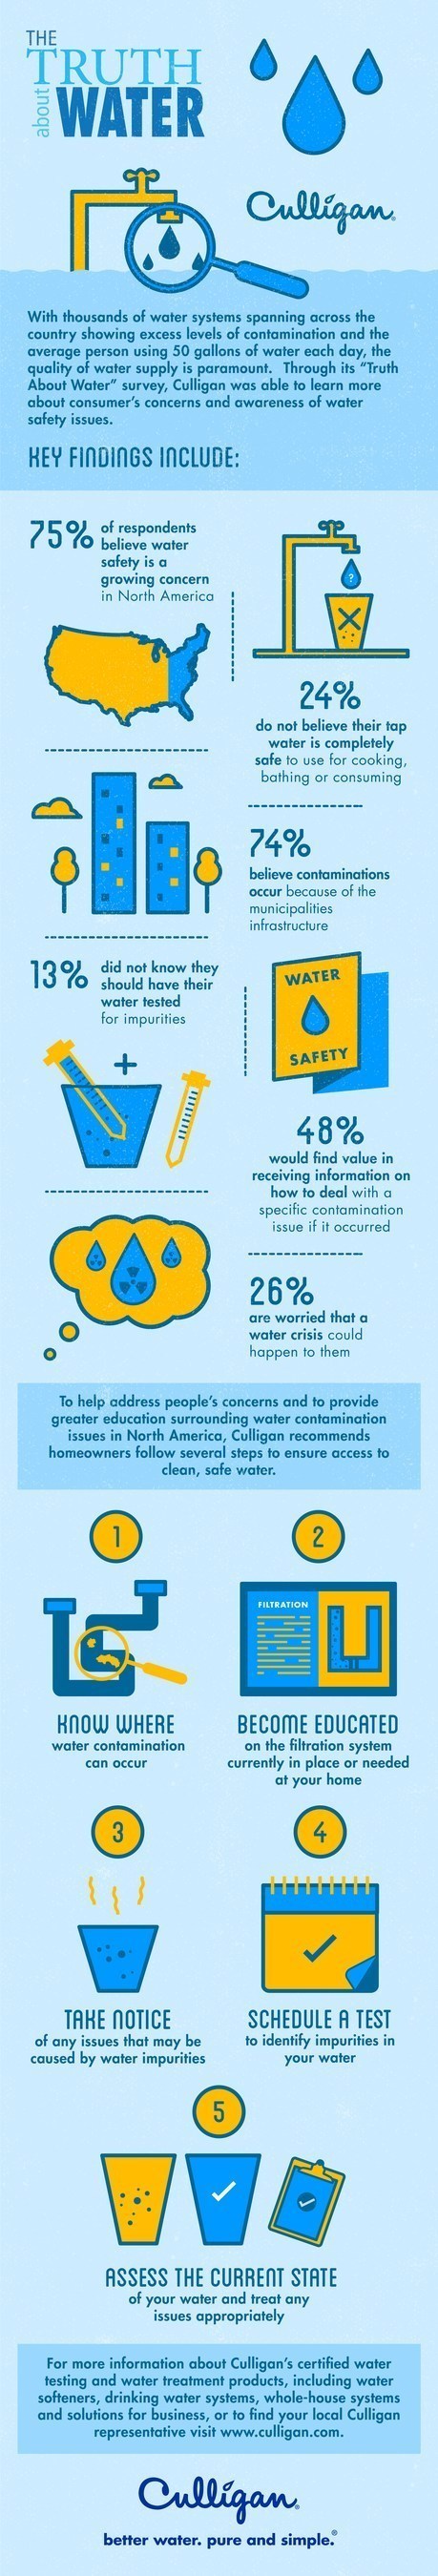 To help address water safety concerns, Culligan International, a world leader in the treatment of water, has launched the "Truth About Water" campaign including a national survey to understand just how much or how little consumers know about water along with actionable tips to help ensure their water is clean and safe.